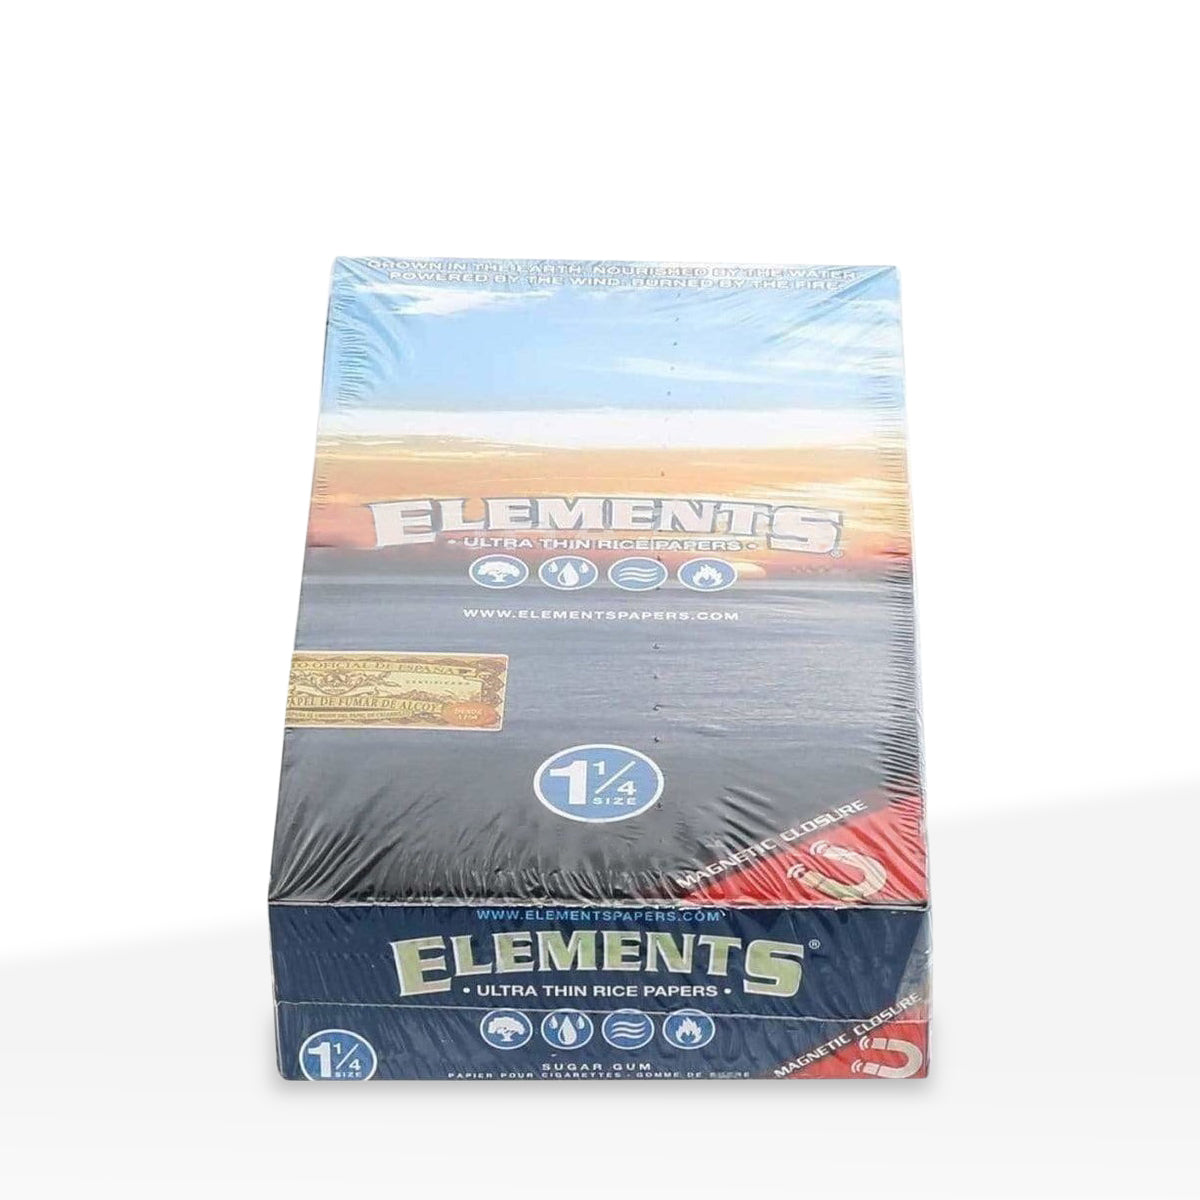 Elements® | 'Retail Display' Ultra Thin Rice Papers 1¼ Size | 78mm - Classic White - 25 Count